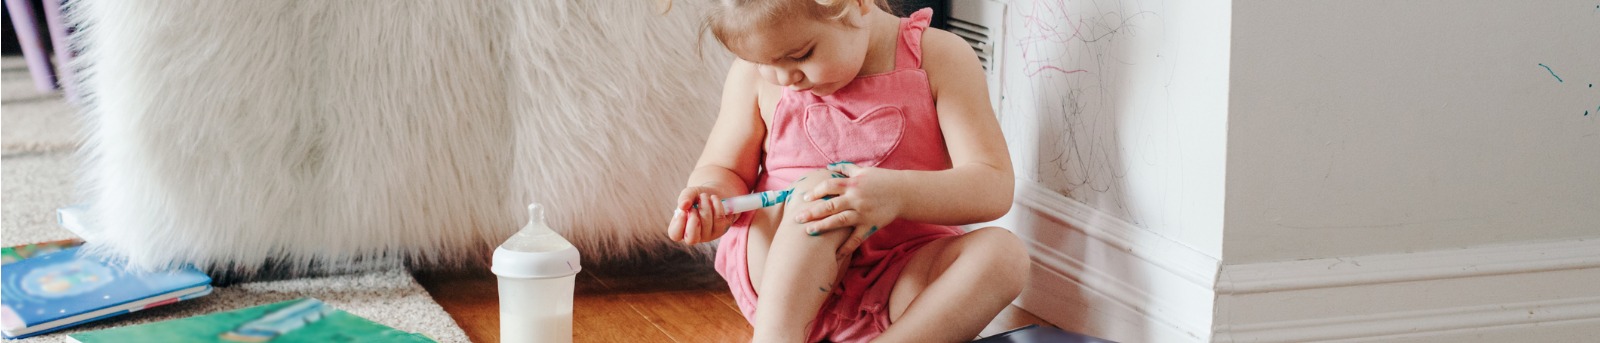 Toddler drawing on herself and the house walls with coloured markers